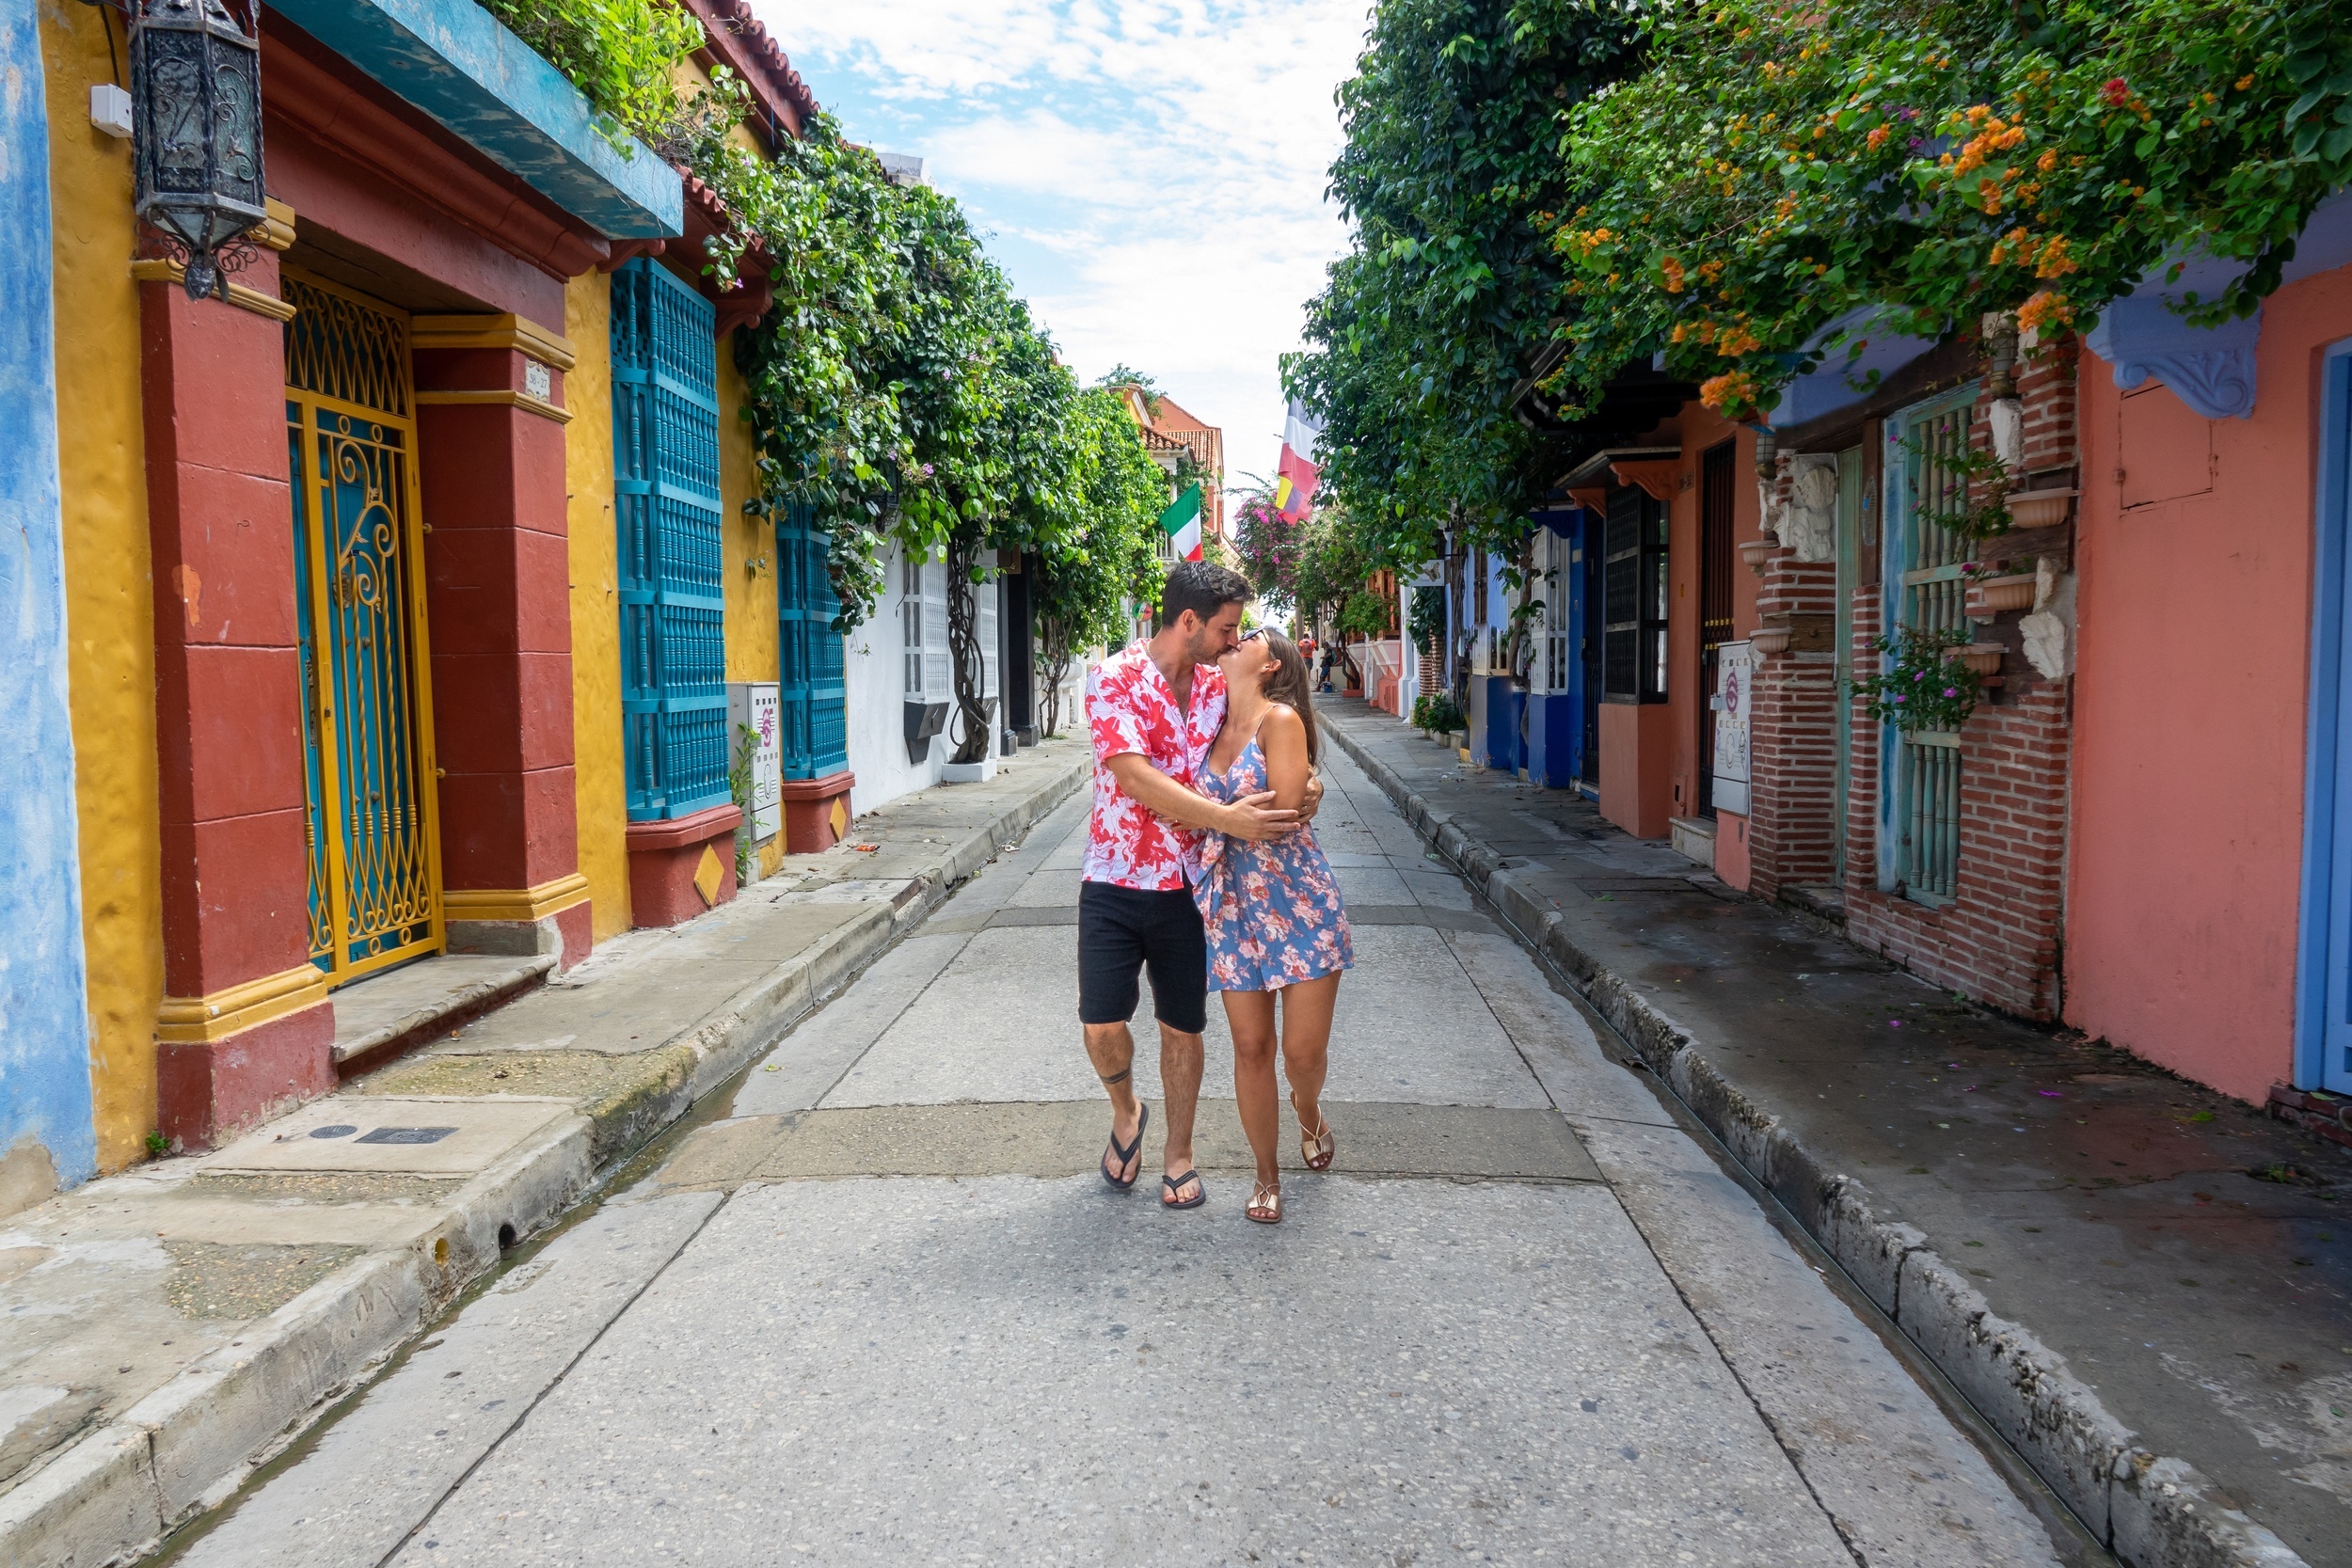 <p>This colorful city on Colombia’s Caribbean coast is a great option for adventurous couples. The nightlife is top-notch, the architecture stuns in all its rainbow glory, and the vibe is always on point. </p><p><a href='https://www.msn.com/en-us/community/channel/vid-cj9pqbr0vn9in2b6ddcd8sfgpfq6x6utp44fssrv6mc2gtybw0us'>Follow us on MSN to see more of our exclusive lifestyle content.</a></p>